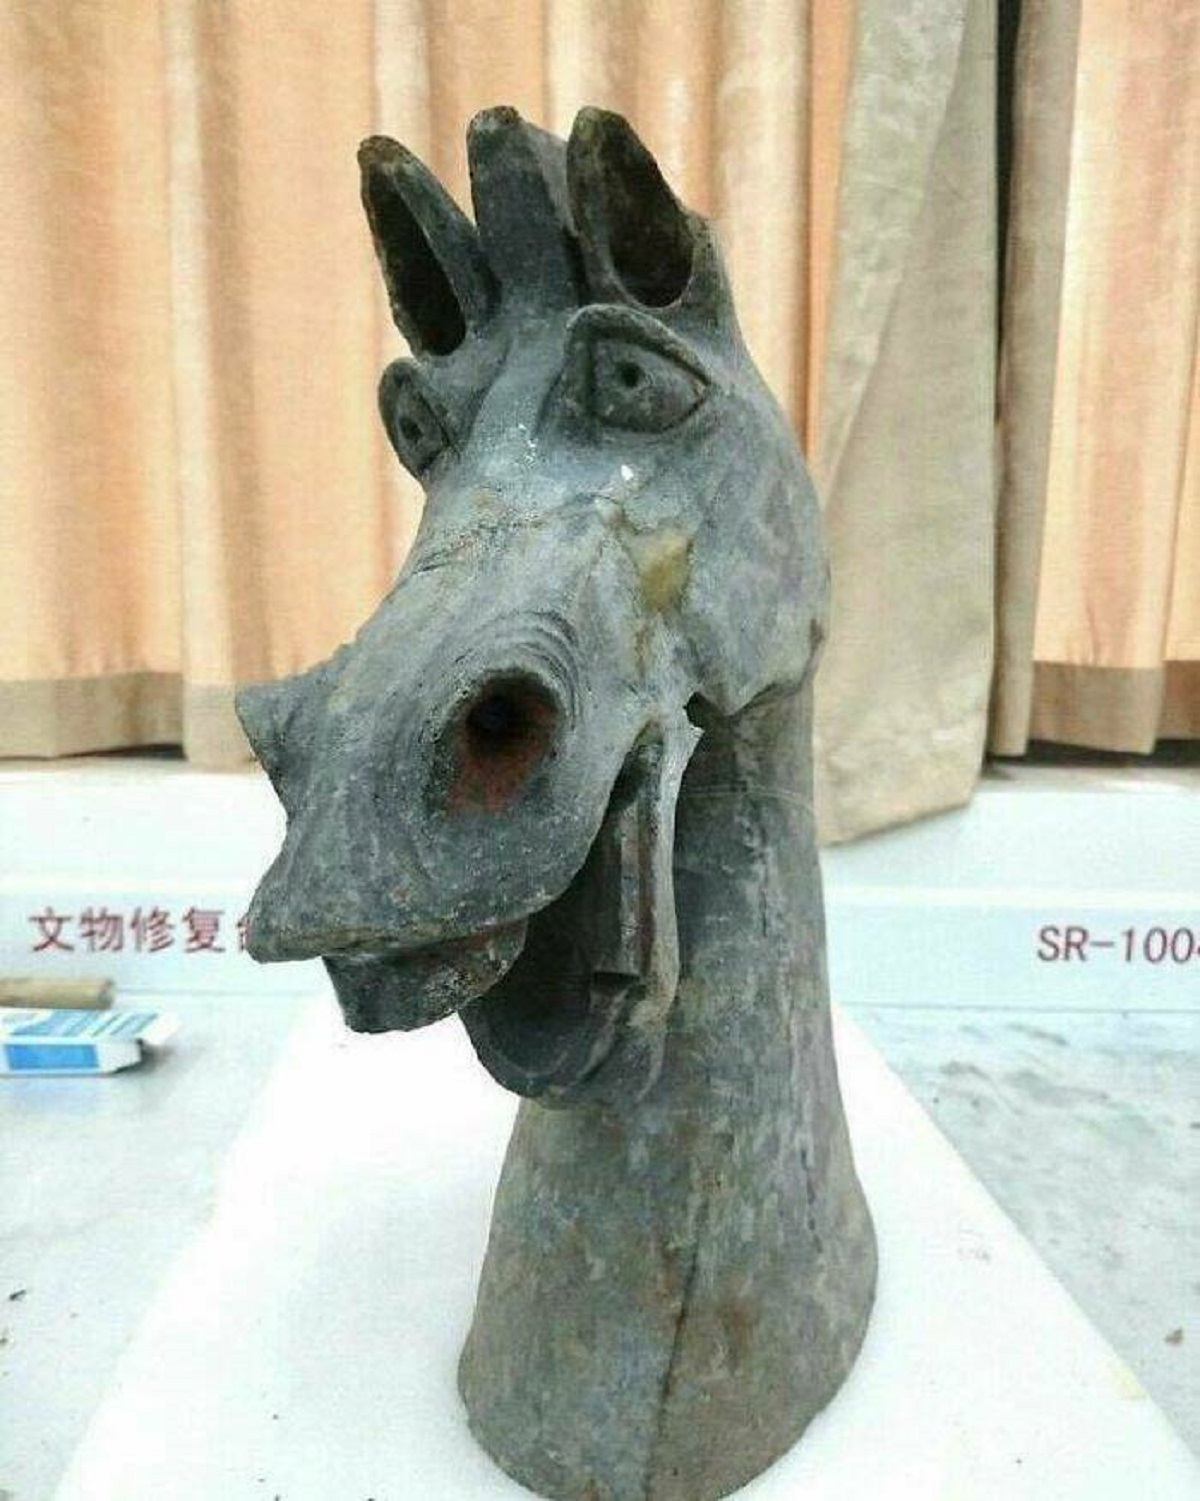 "A 1800-Year Old Ceramic Horse. Han Dynasty (202 Bce– 9 Ce, 25–220 Ce), Now Housed At The Sanxingdui Museum In China"